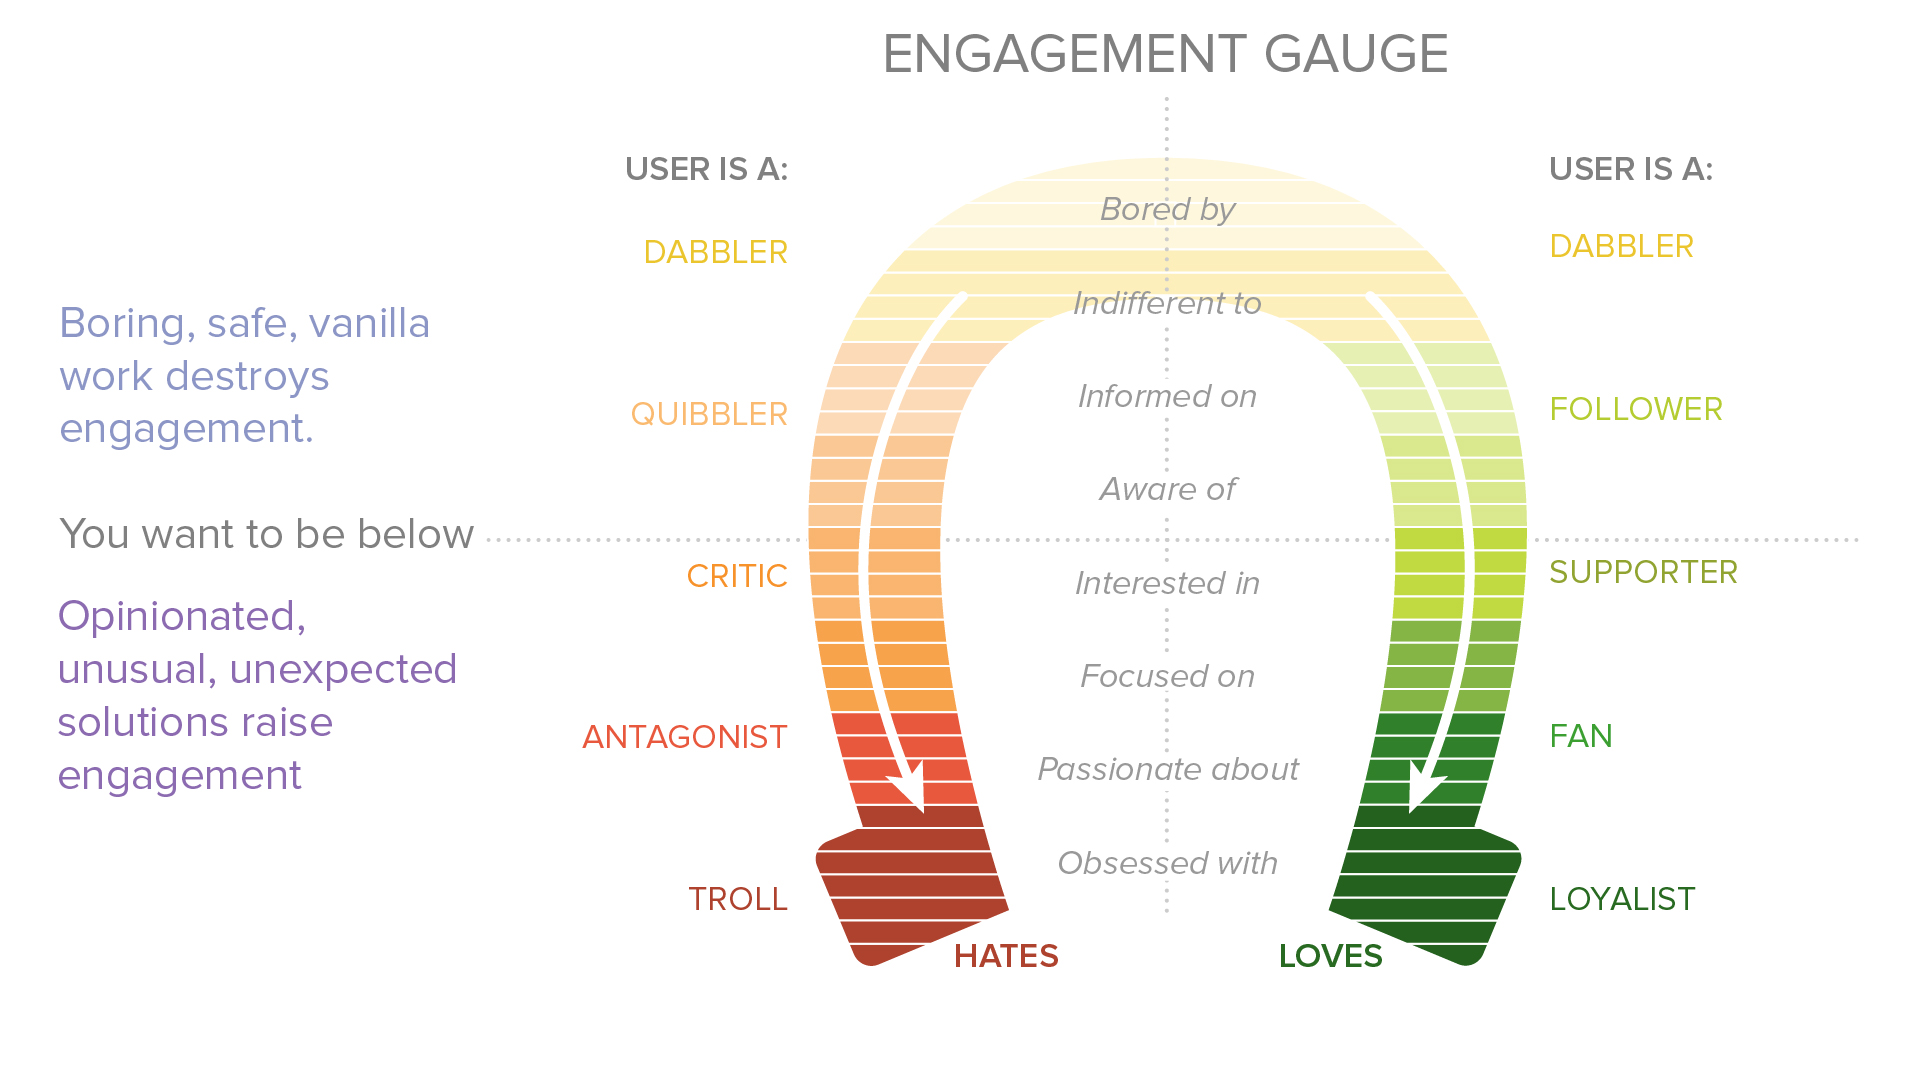 How to gauge brand engagement